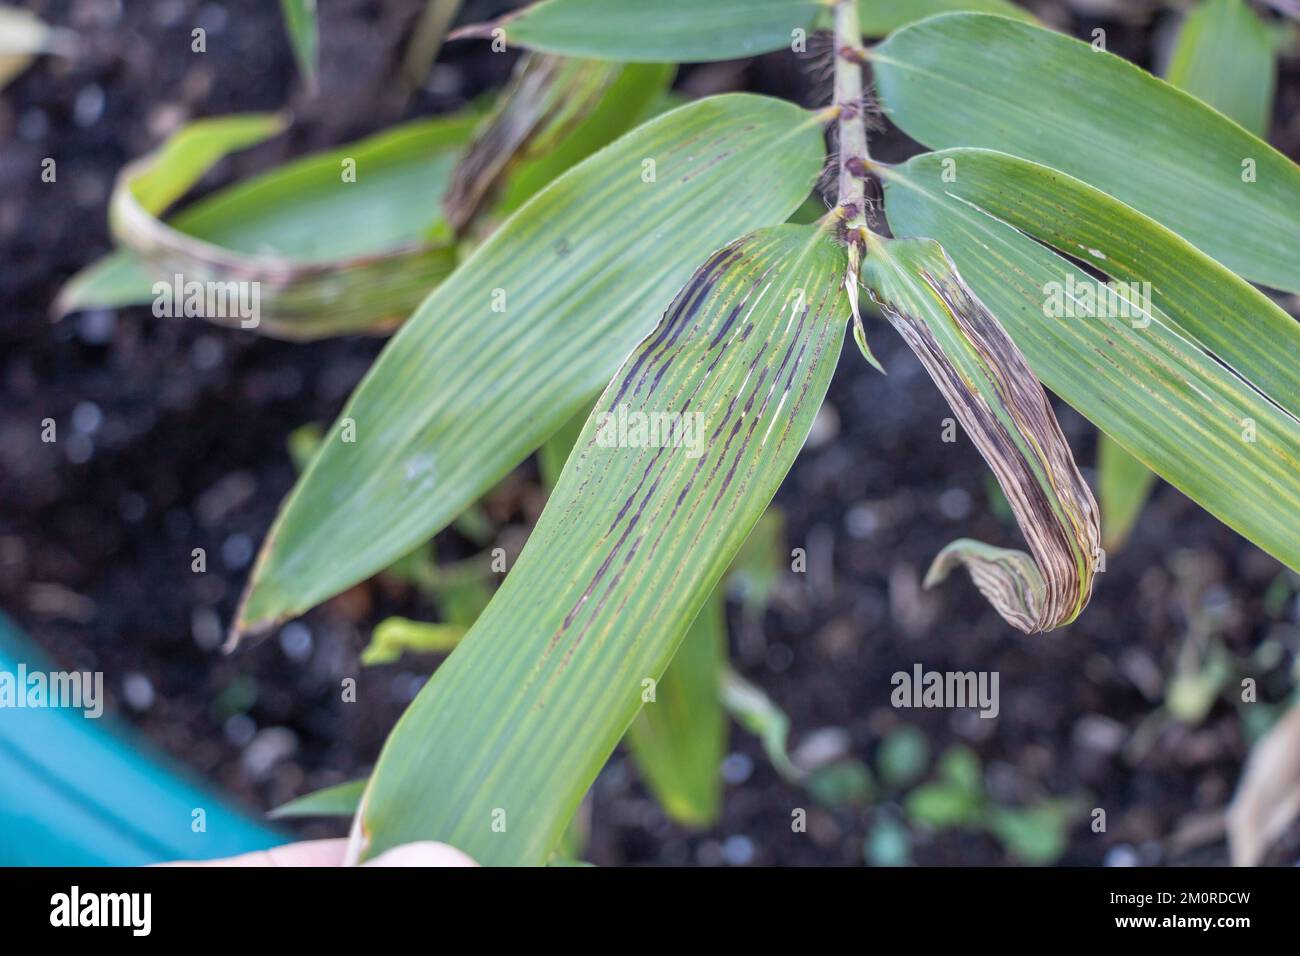 A bamboo plant with diseased leaves close up Stock Photo